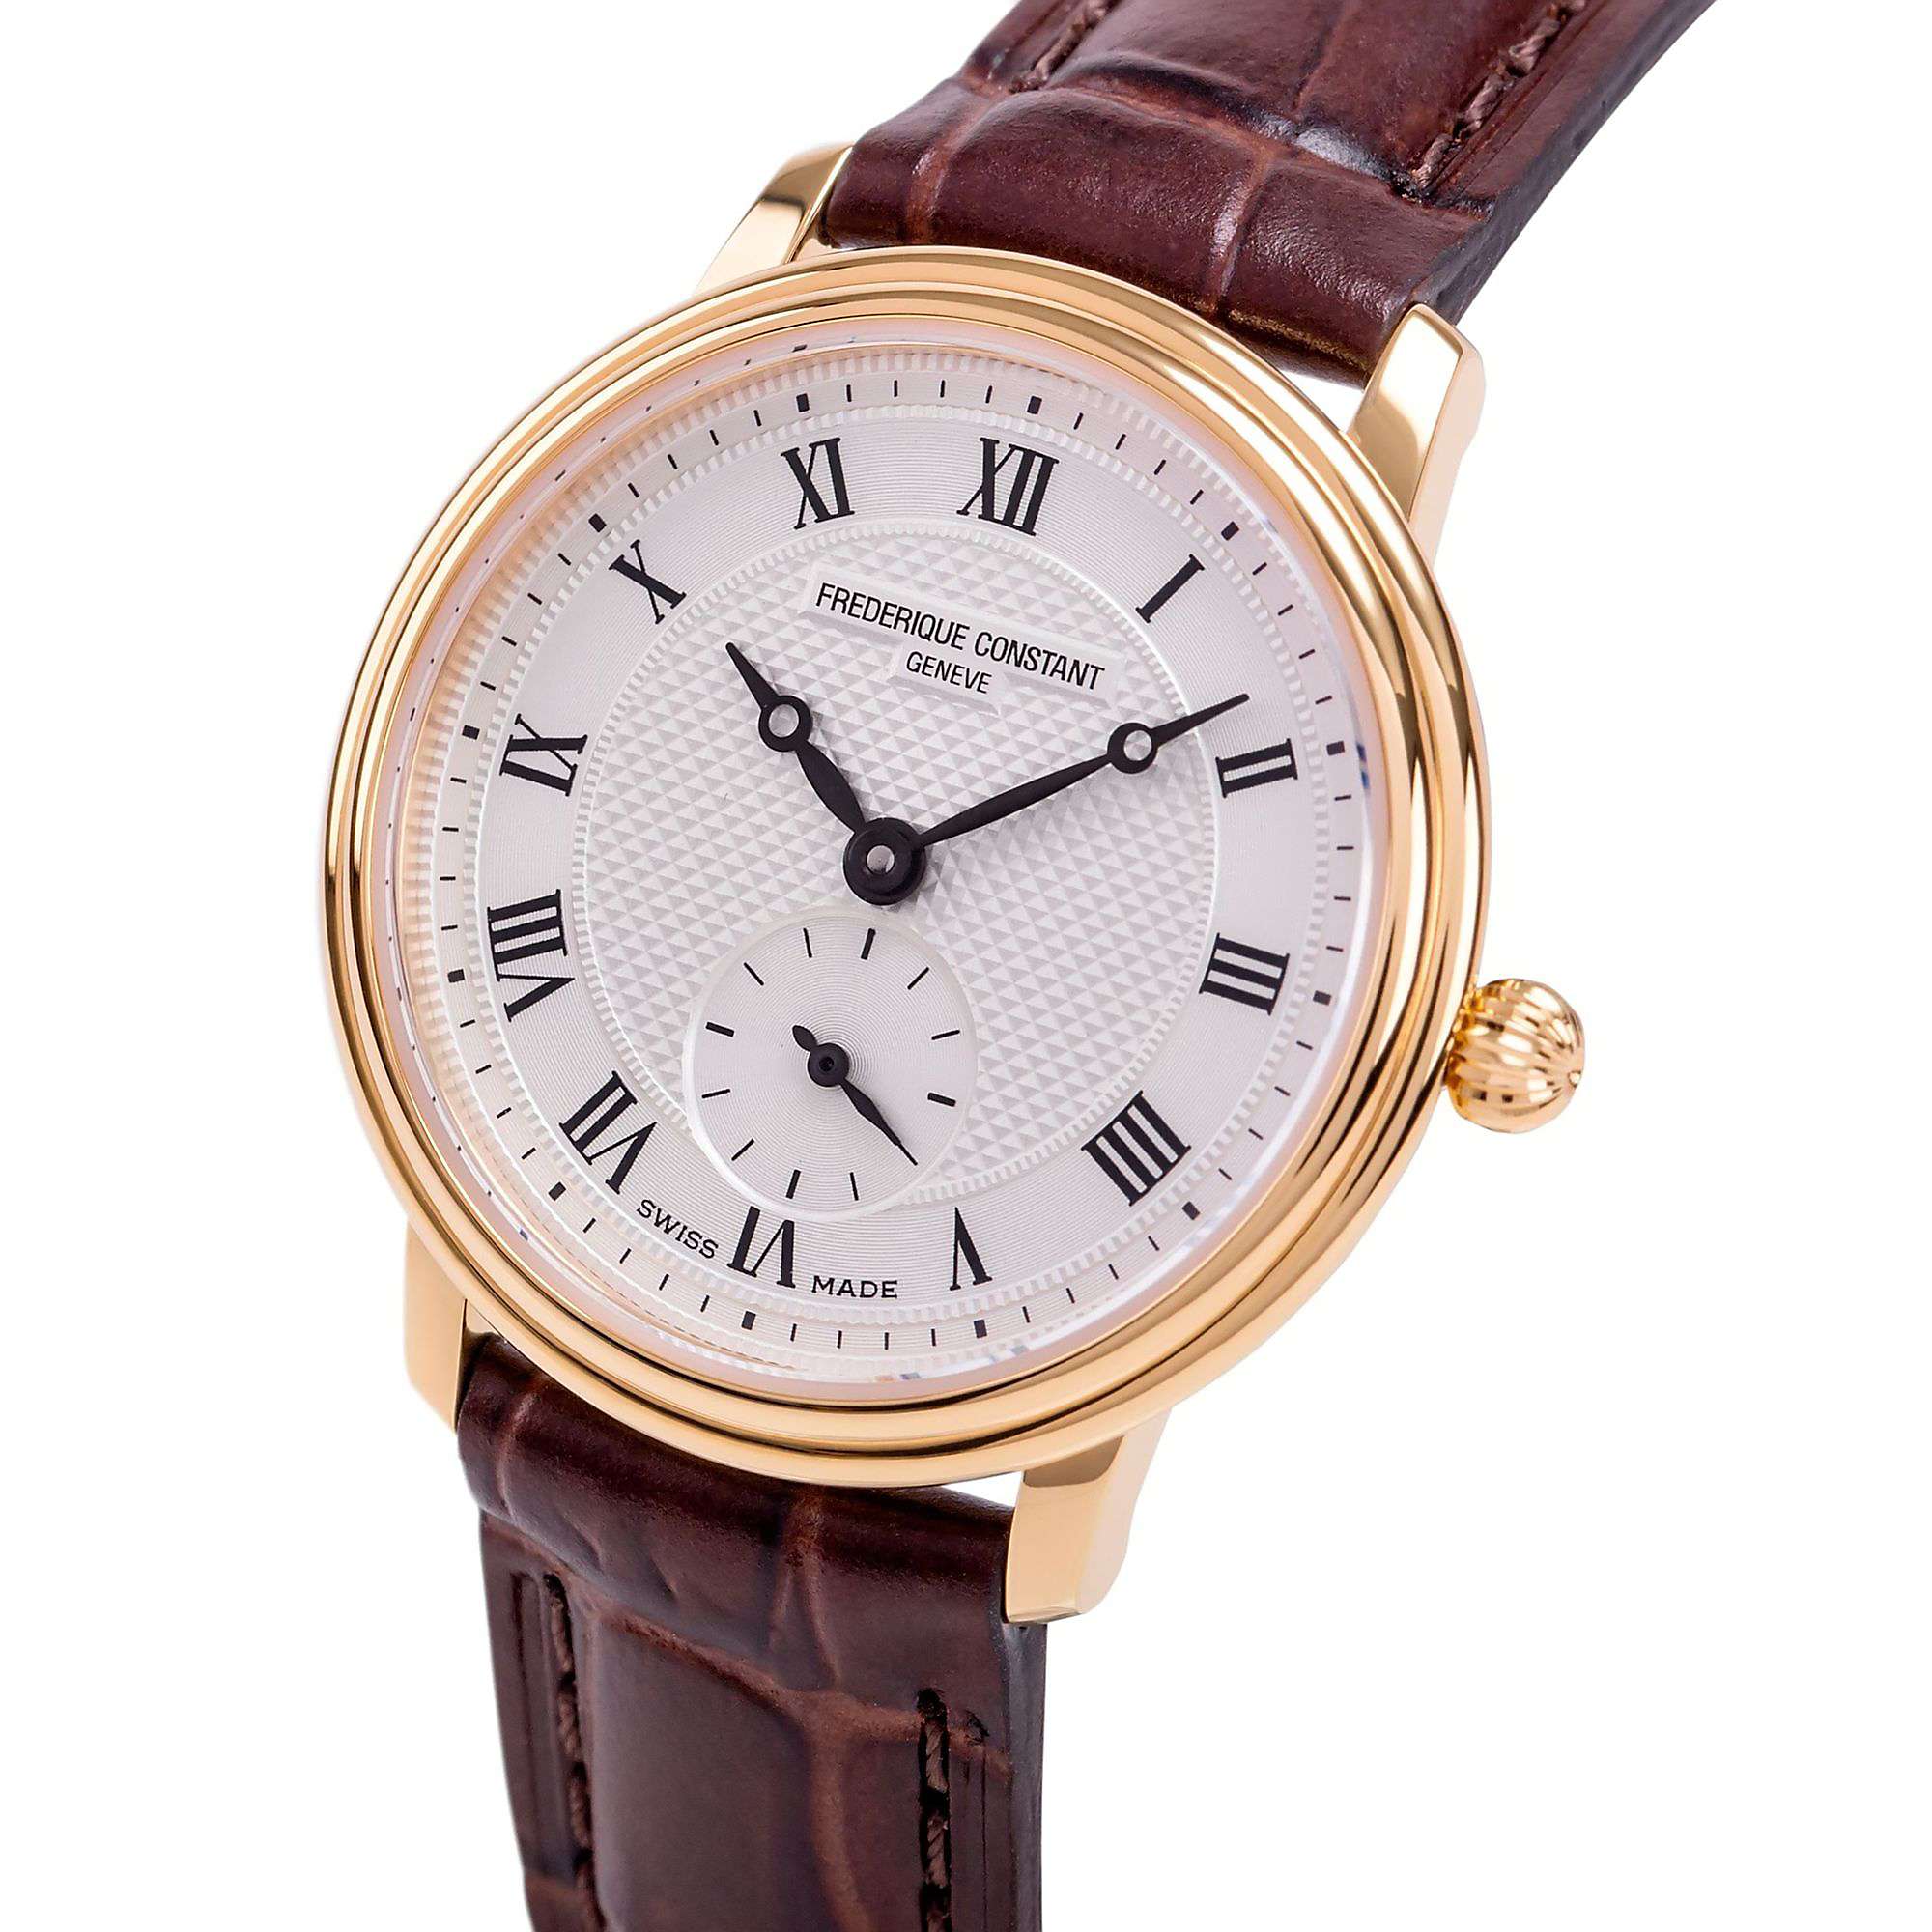 Buy Frederique Constant FC-235M1S5 Women's Slimline Leather Strap Watch, Brown/White Online at johnlewis.com